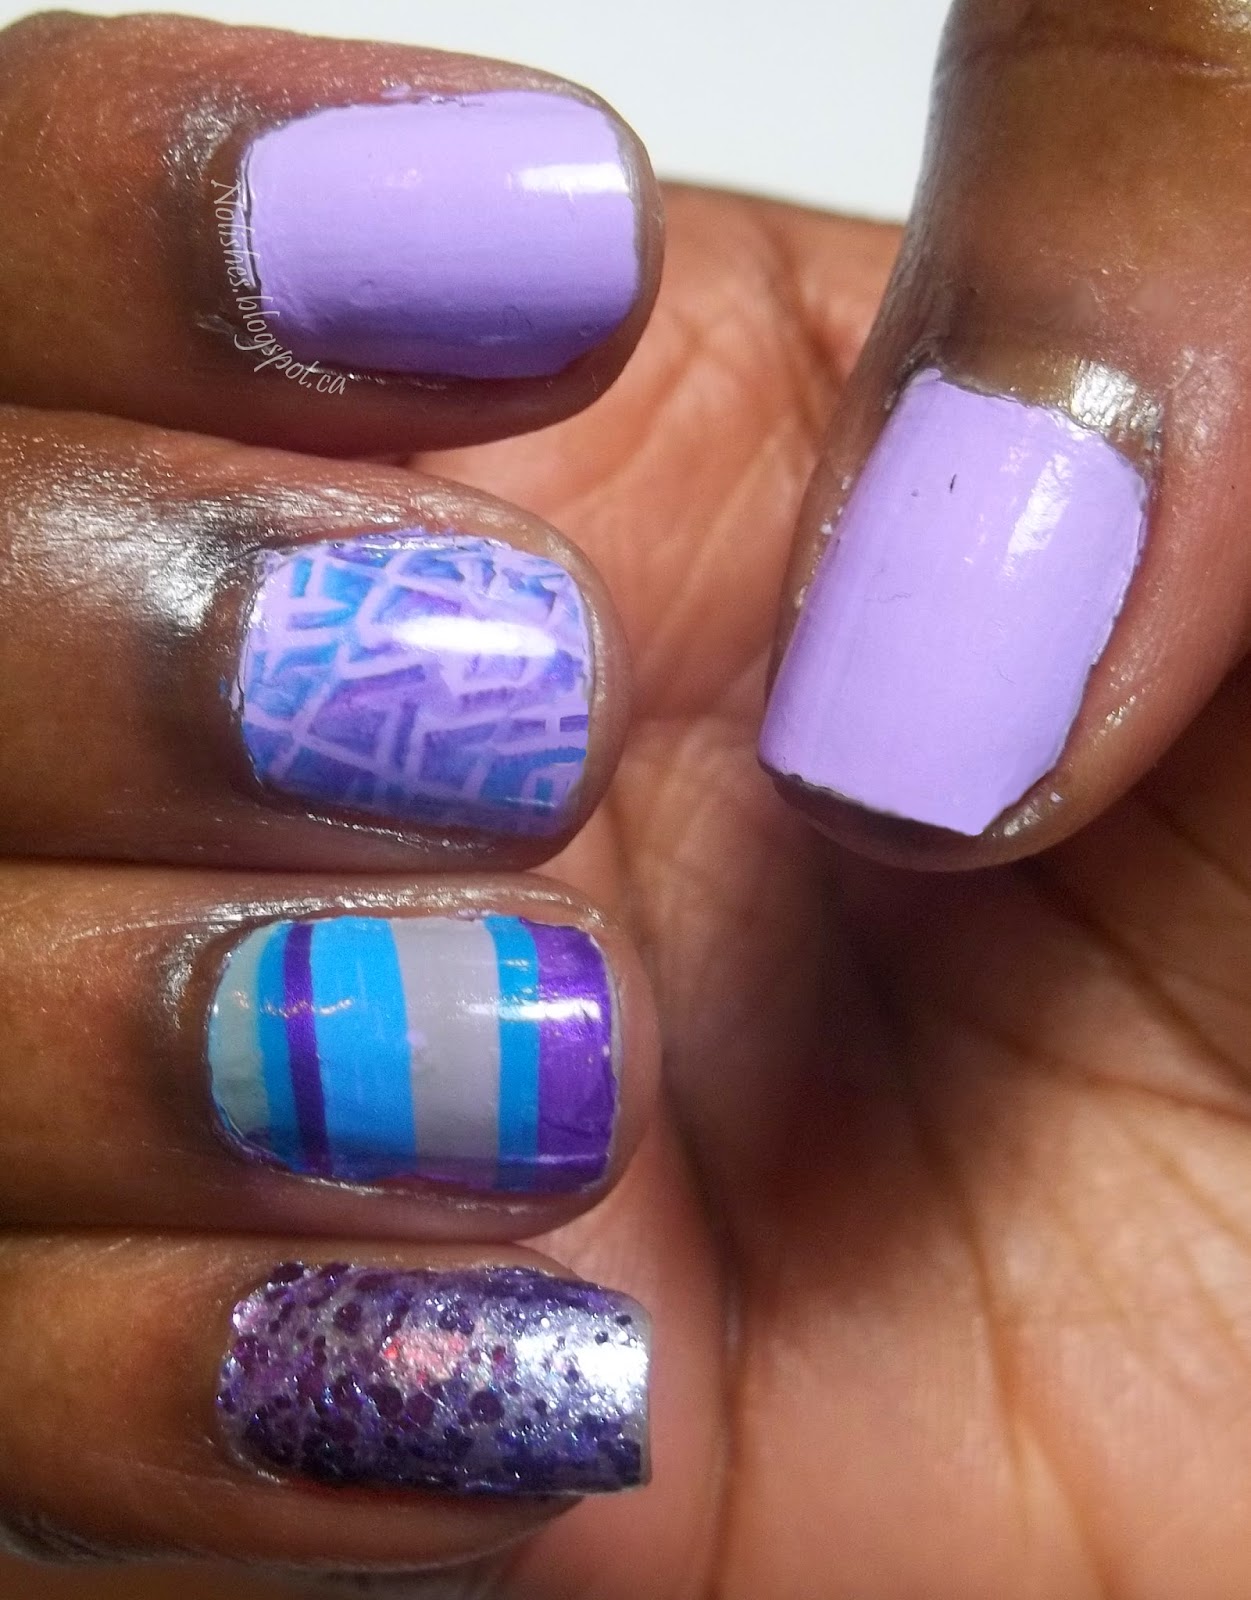 Purple Water Marble and Stamping Mani. Accent colours are teal, bright blue and grey. The water marble has bands of all 4 colours, and is only on the ring finger. The middle finger is the only one stamped with a geometric design, with a multi-colour polish application. The pinky is covered in purple glitter, and the thumb and index fingers are solid light purple.